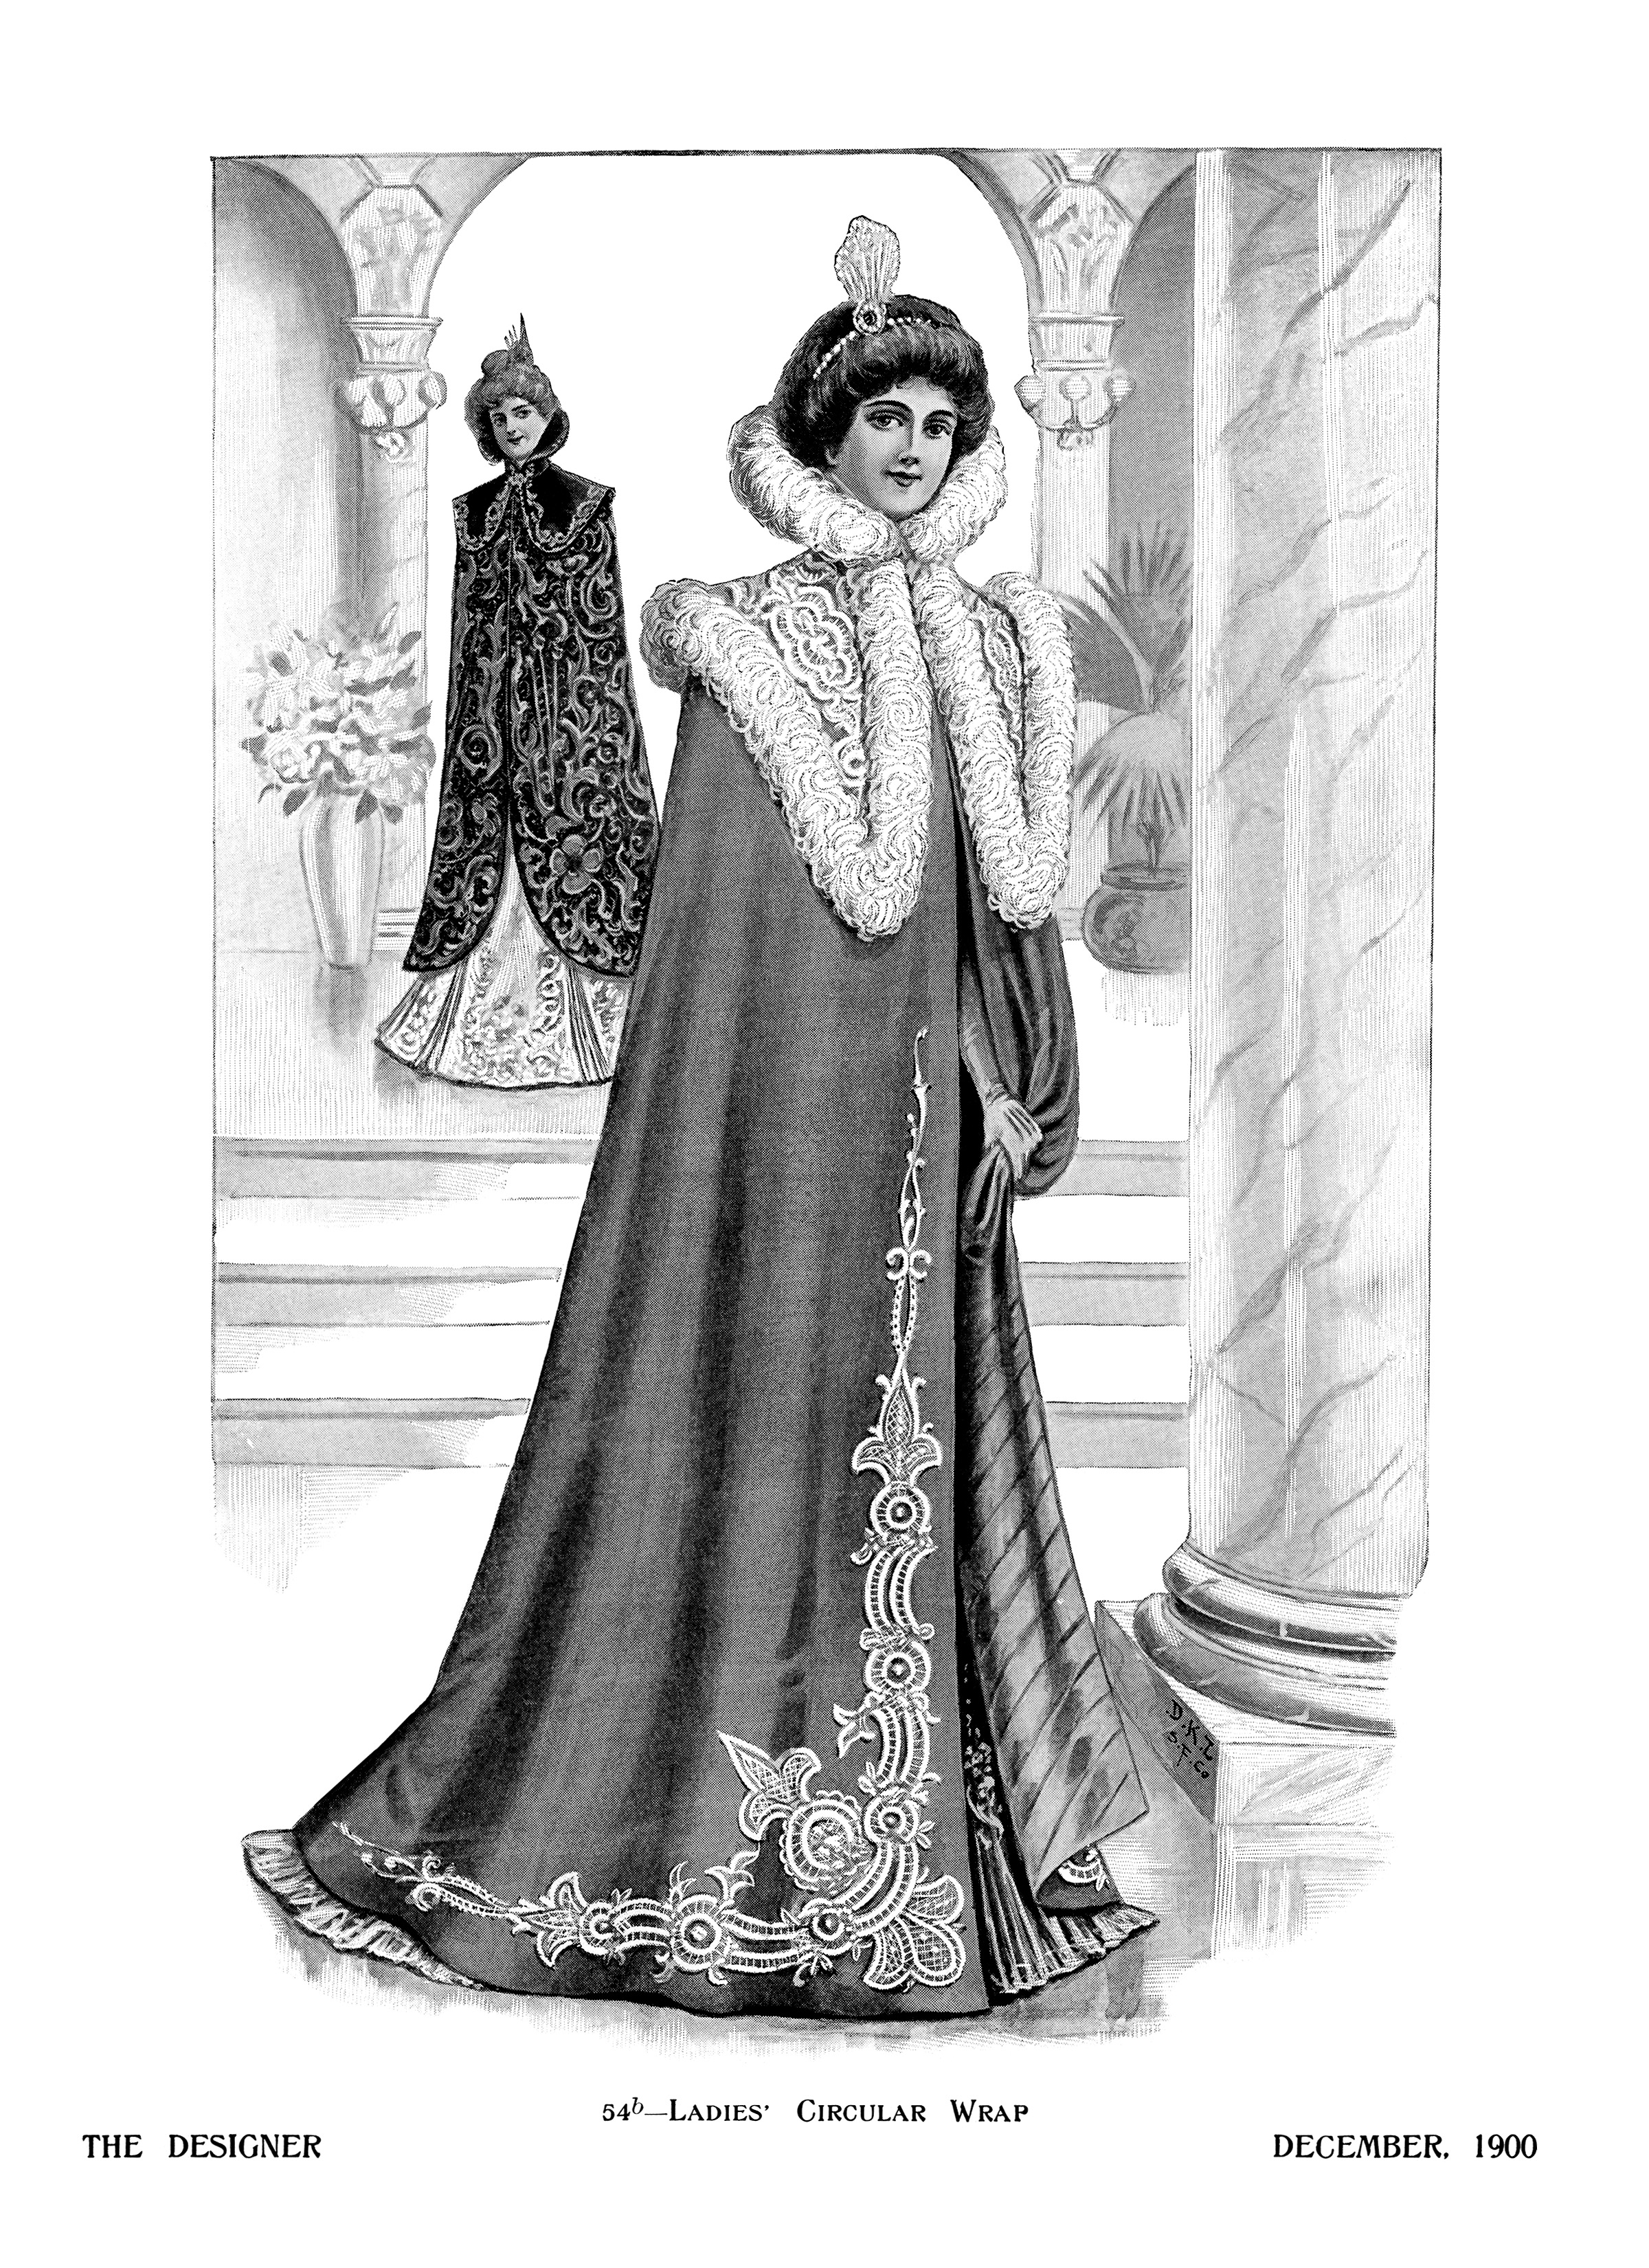 Victorian lady, black and white clip art, Victorian fashion image, antique womens clothing, vintage fashion illustration